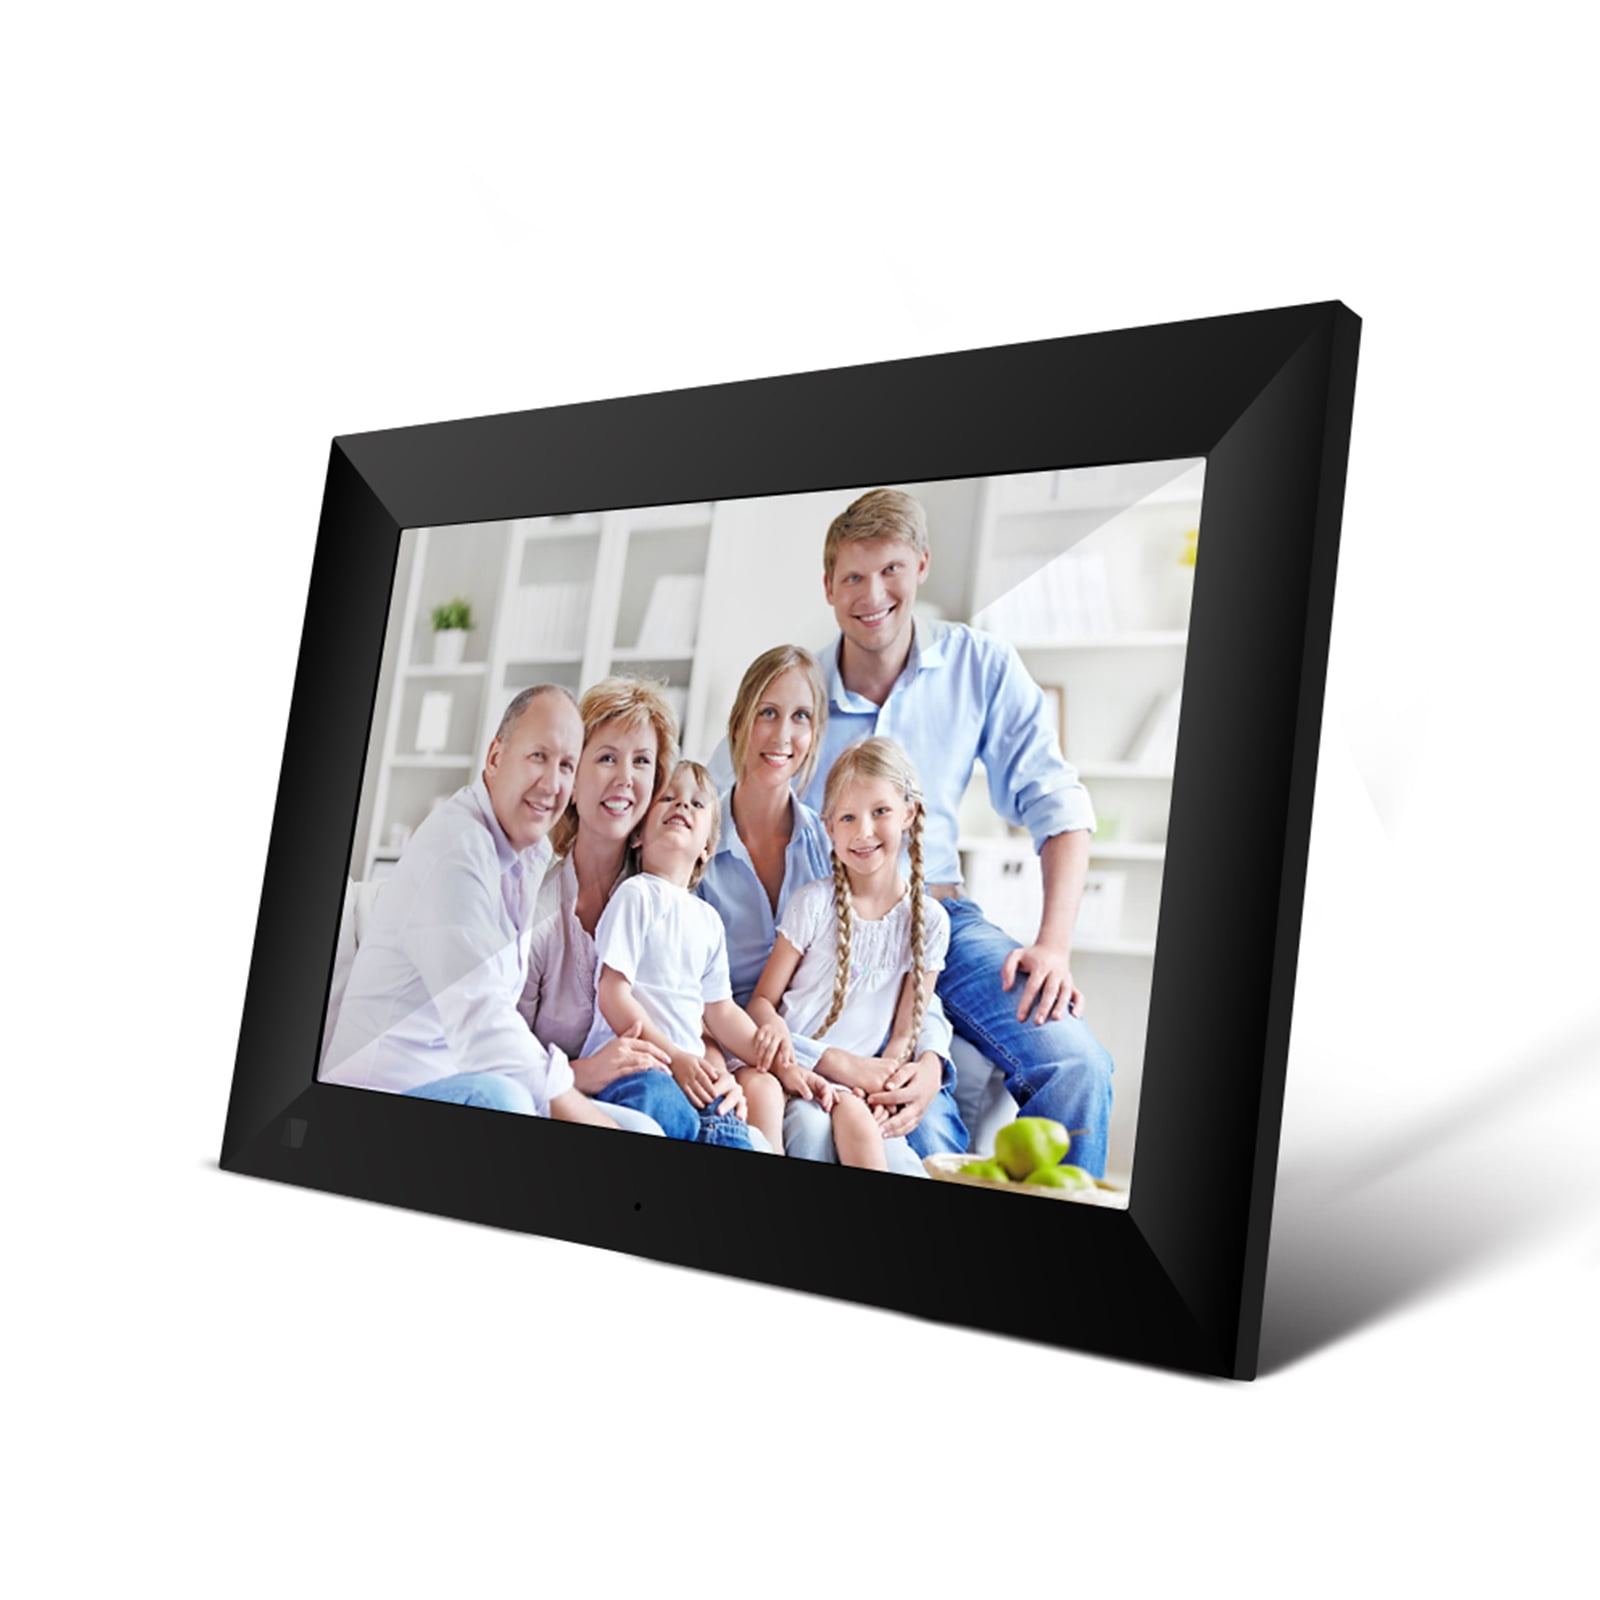 Touch Screen 10 Inch 16gb Smart WiFi Cloud Digital Picture Frame with 800x1280 IPS LCD Panel White Email Photos from Anywhere